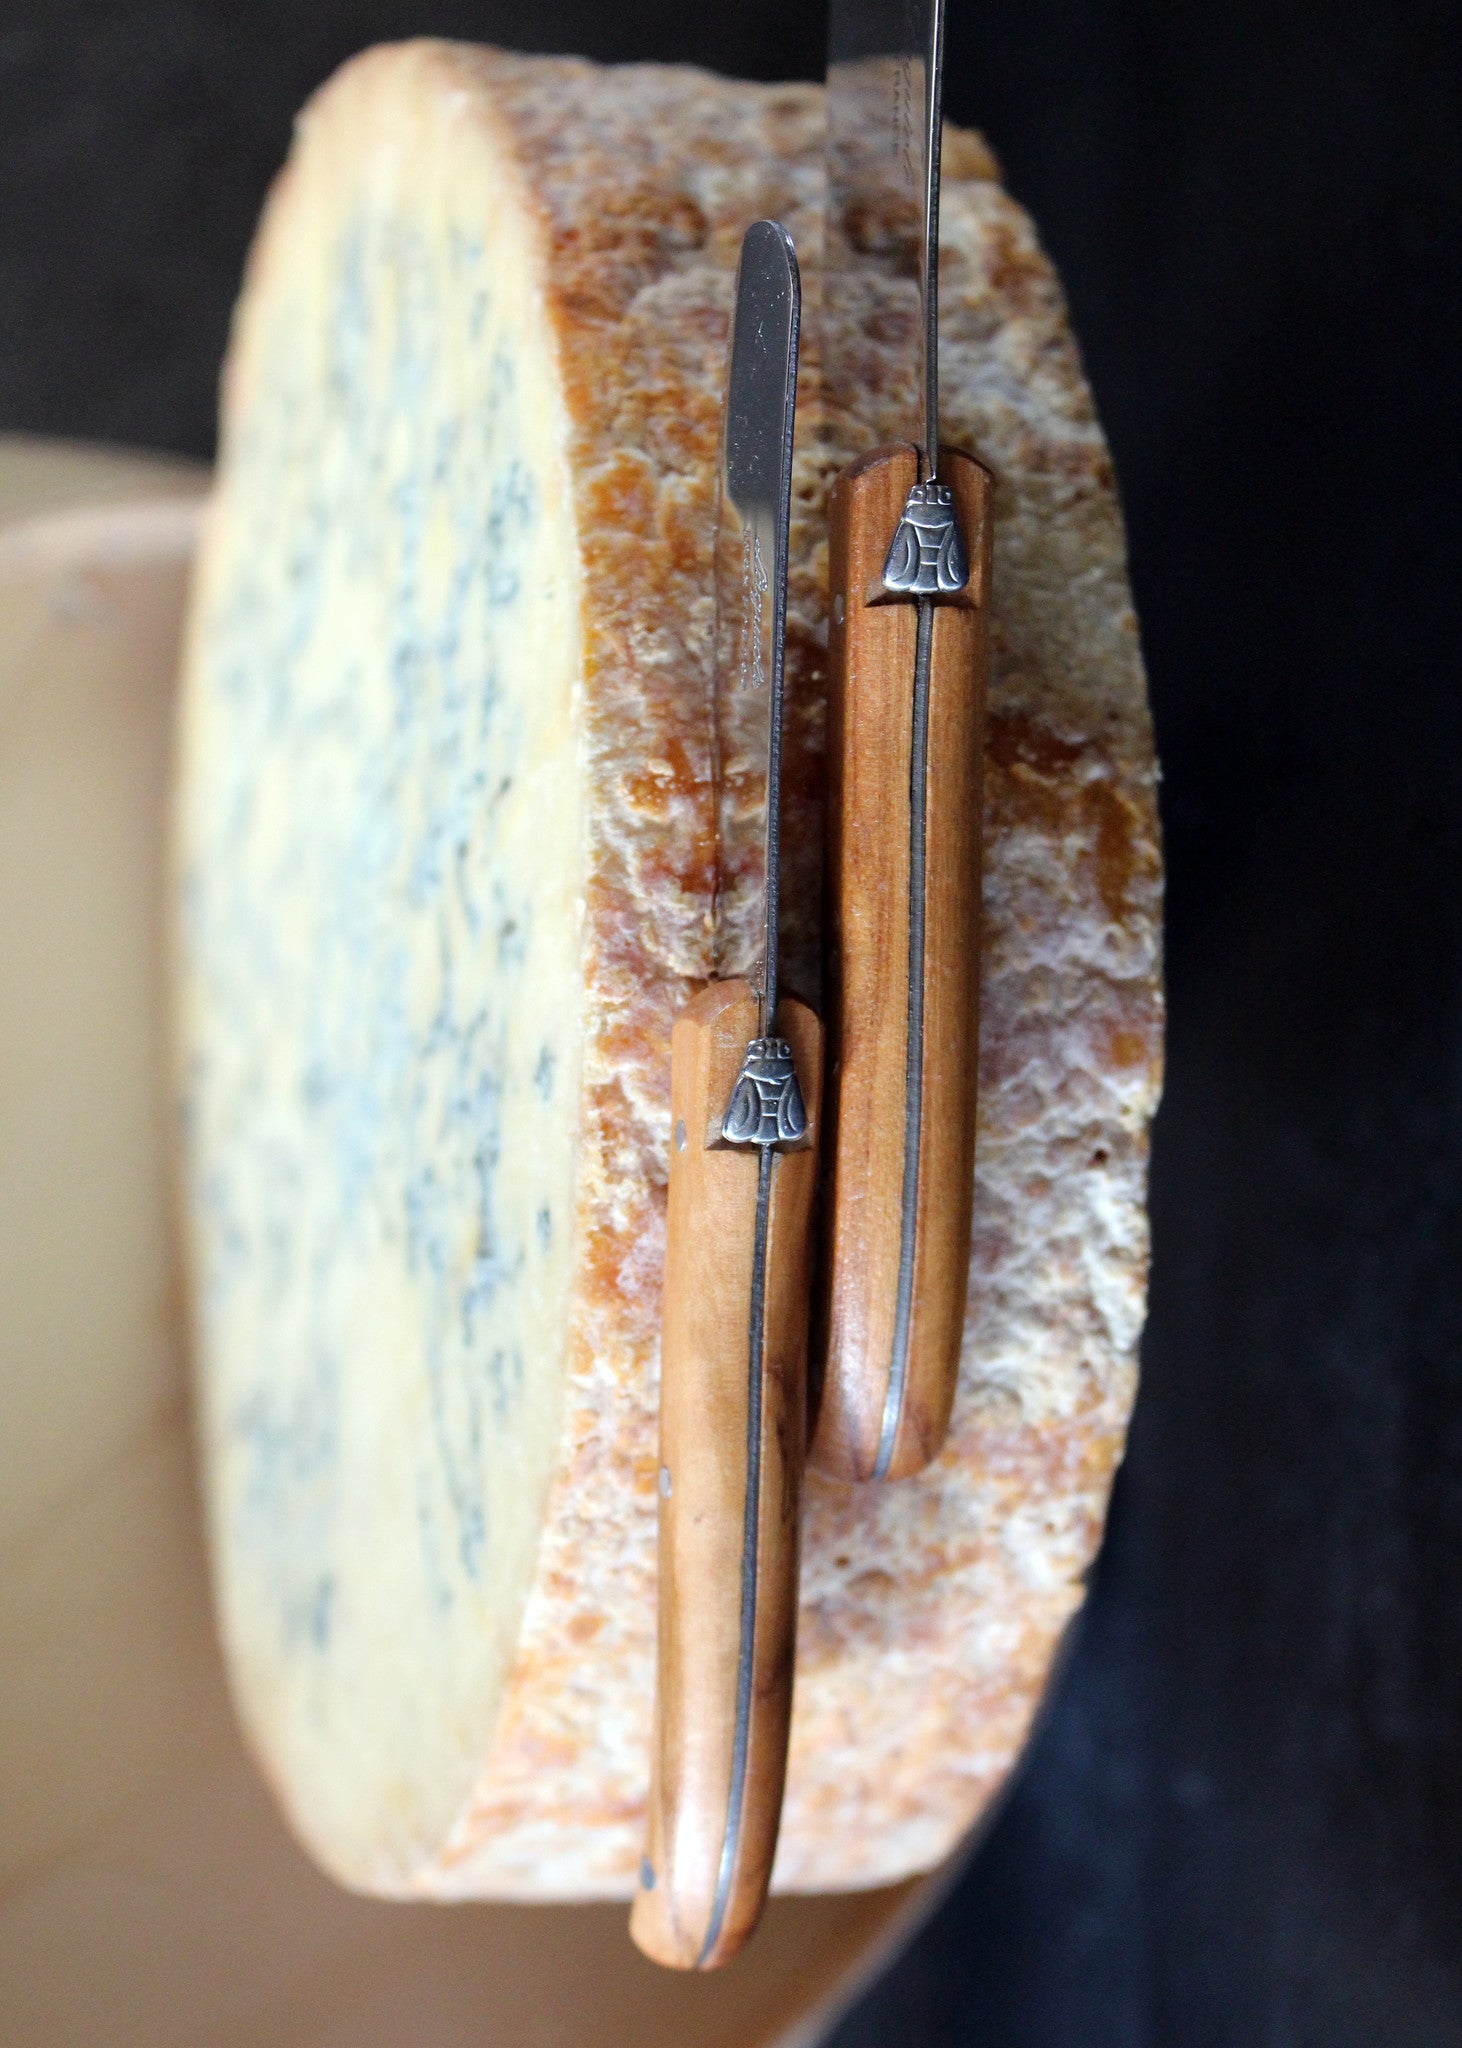 Laguiole Olivewood Mini Cheese Spreader Cutlery Laguiole Brand_Laguiole Cheese Sets Kitchen_Dinnerware Kitchen_Kitchenware Laguiole Loose Mini Rainbow Utensils mini_cheese_olivewood